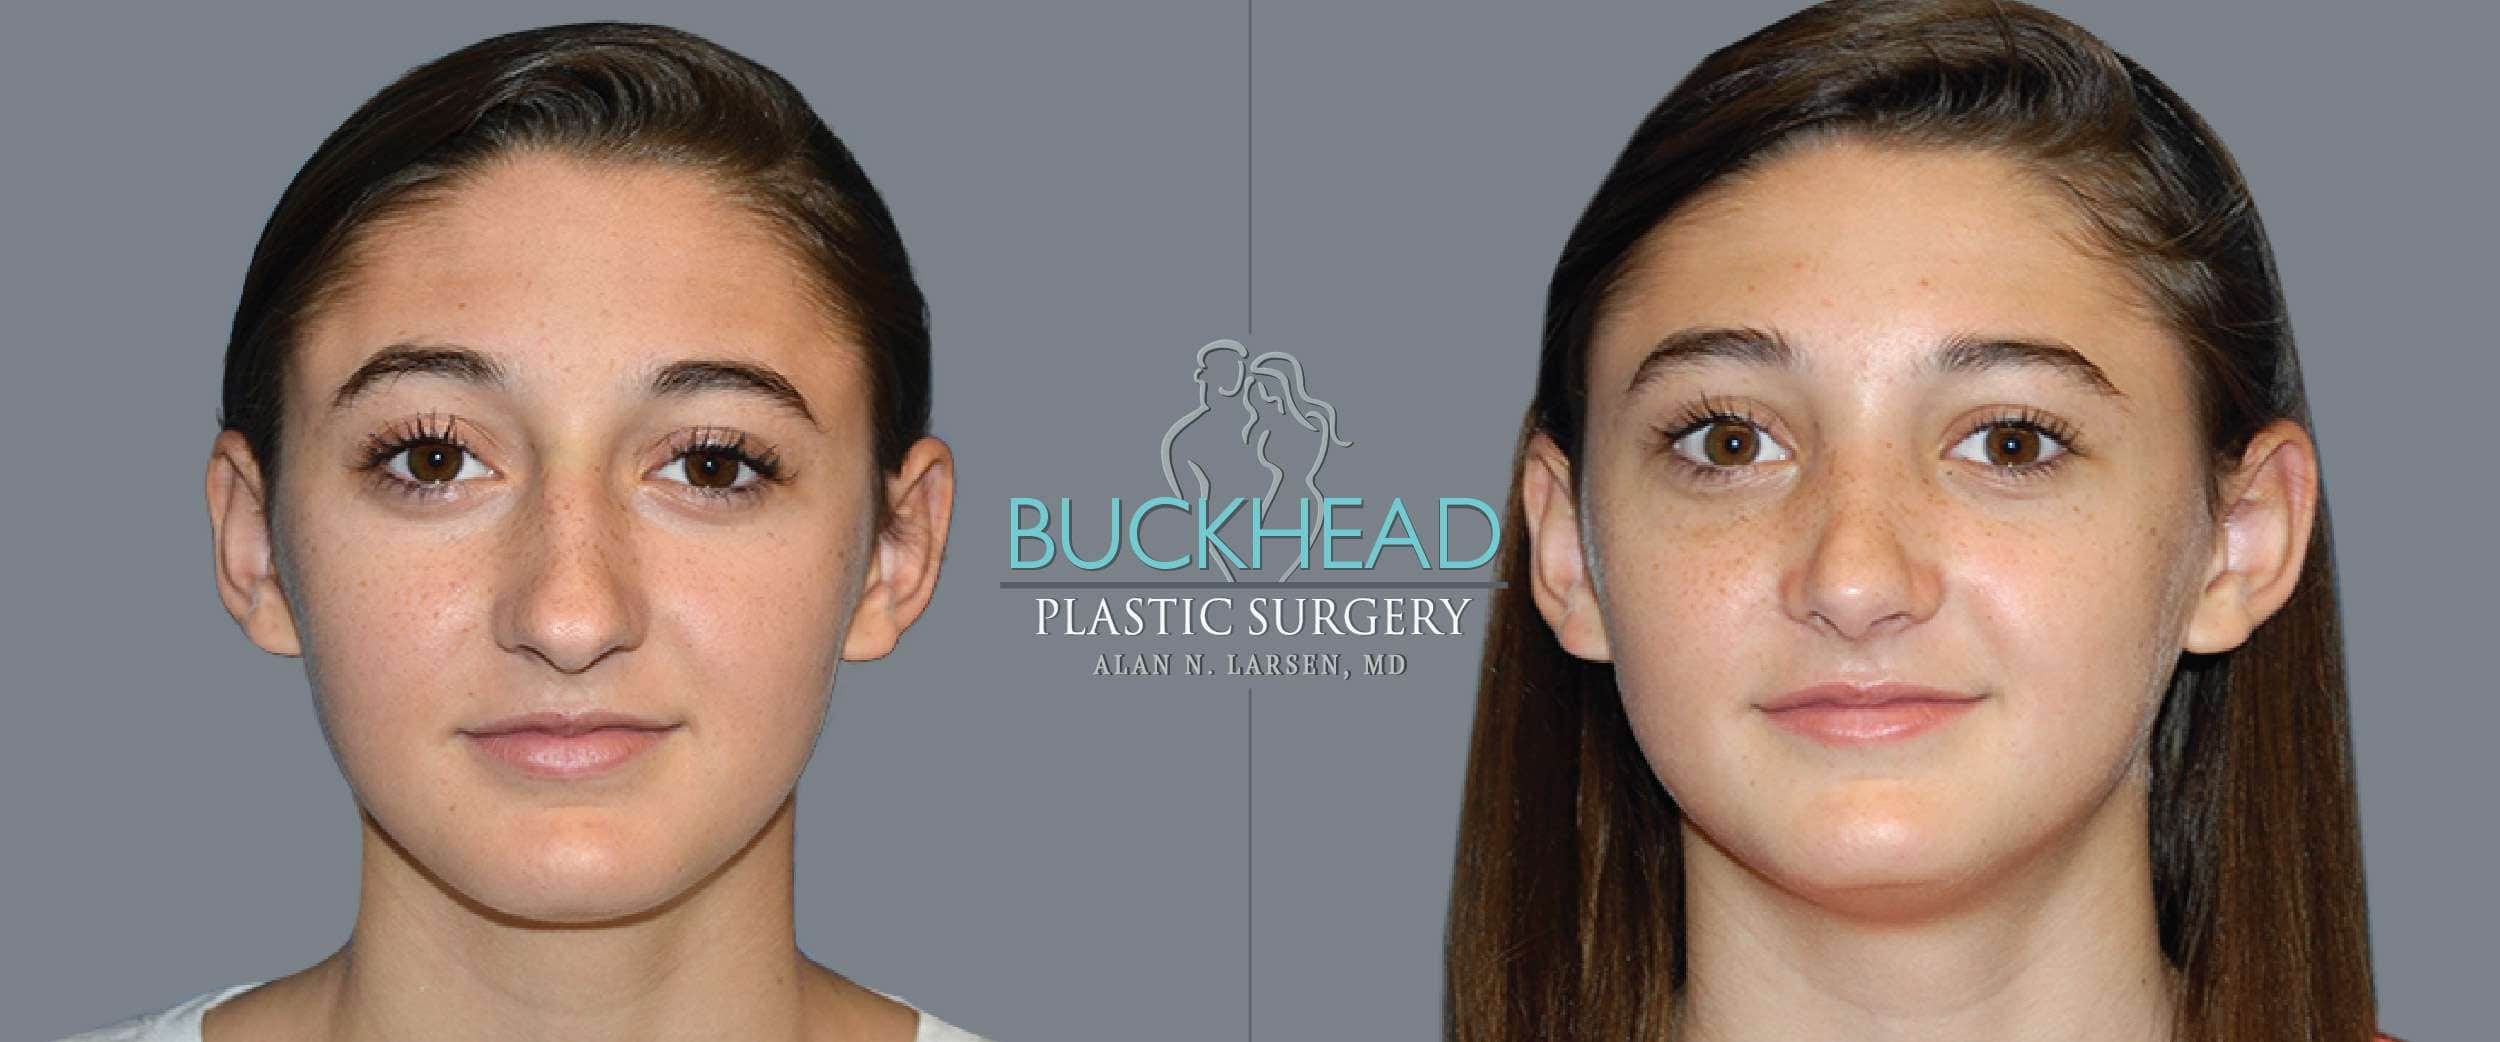 Before and After Photo gallery | Rhinoplasty | Buckhead Plastic Surgery | Double Board-Certified Plastic Surgeon in Atlanta GA